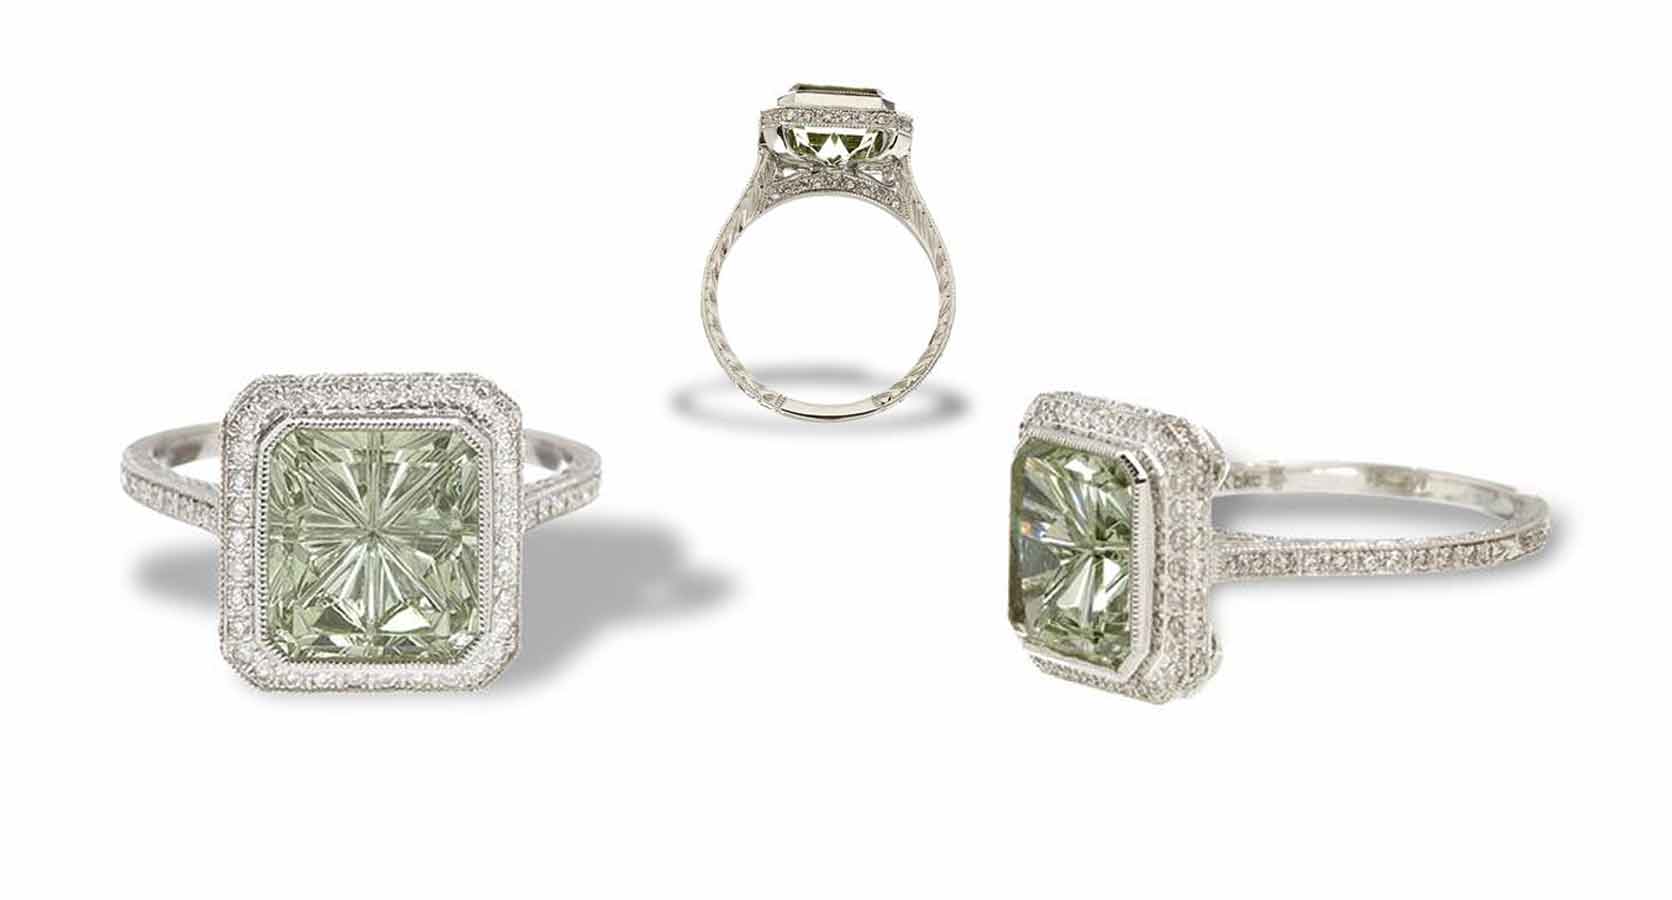 Green Beryl Ring In a Gold and Diamond mounting